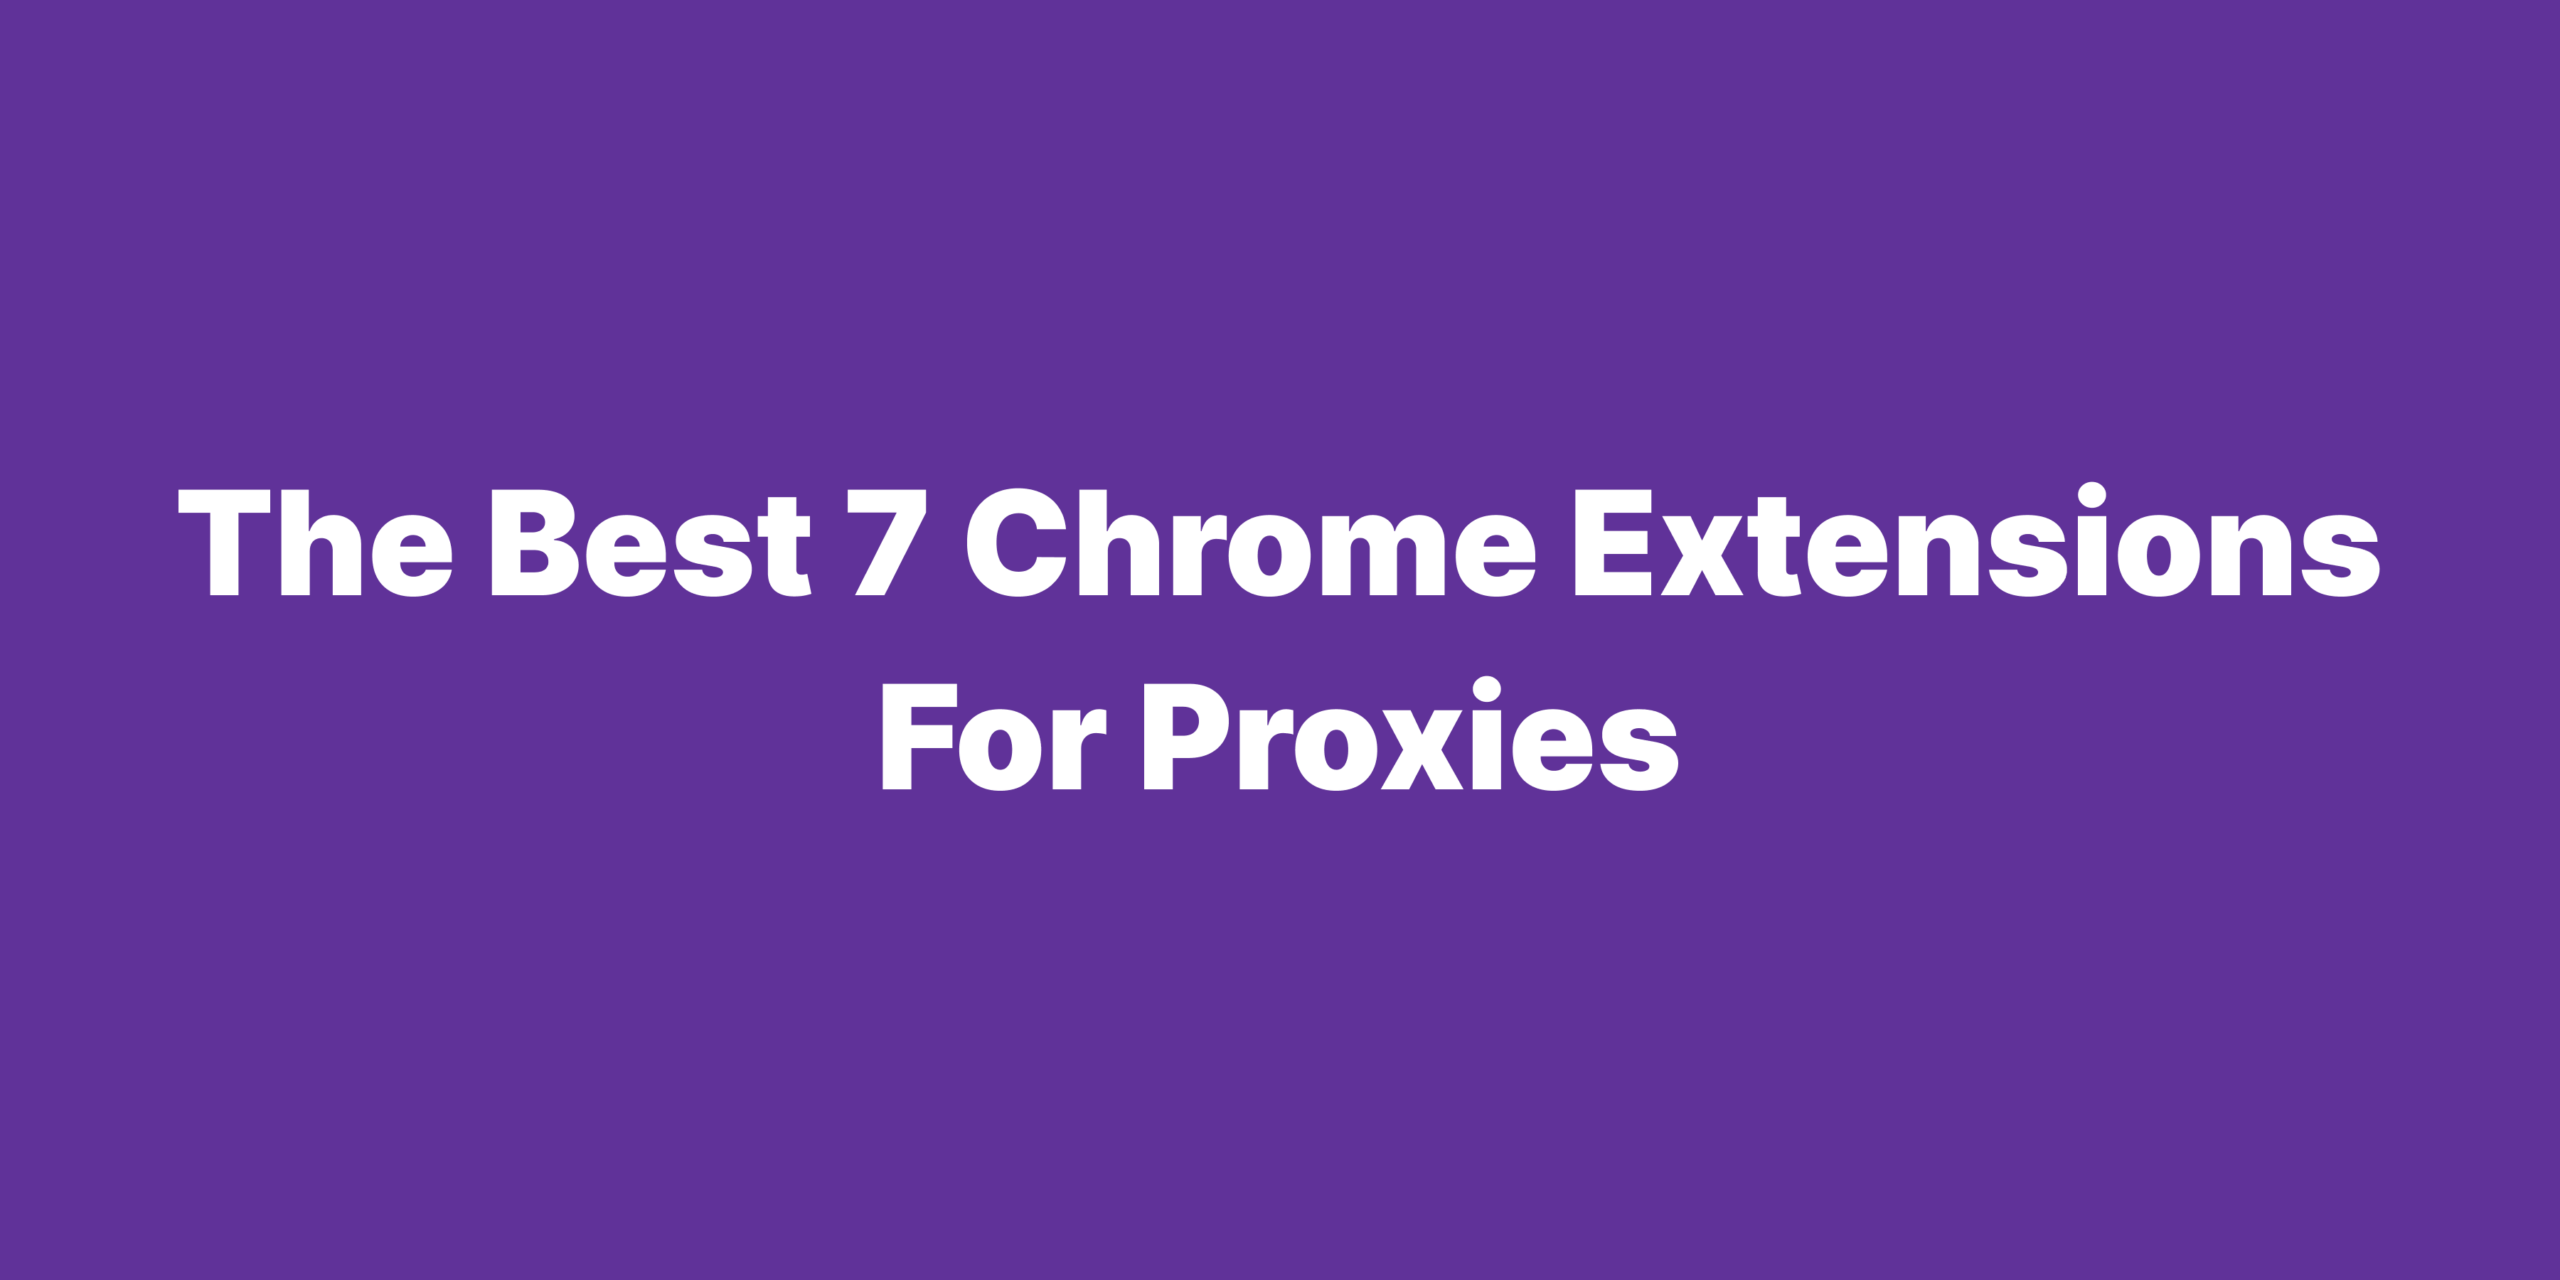 The best chrome extensions for proxies